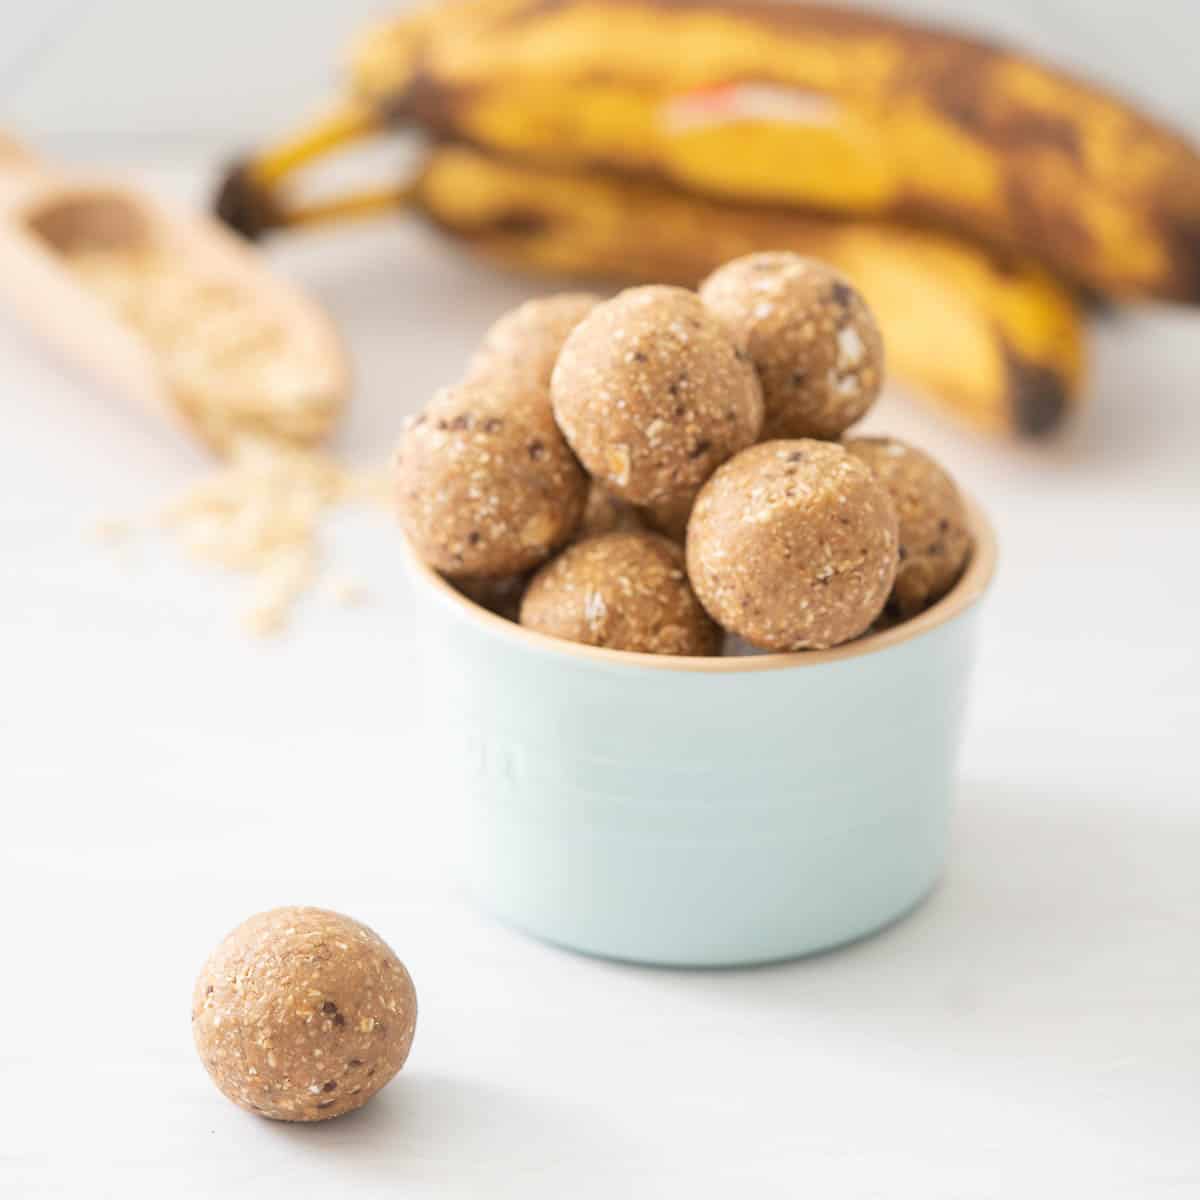 A banana flavoured energy bite sitting in-front of a blue ceramic bowl of more banana bread balls, ripe bananas and rolled oats in the background.